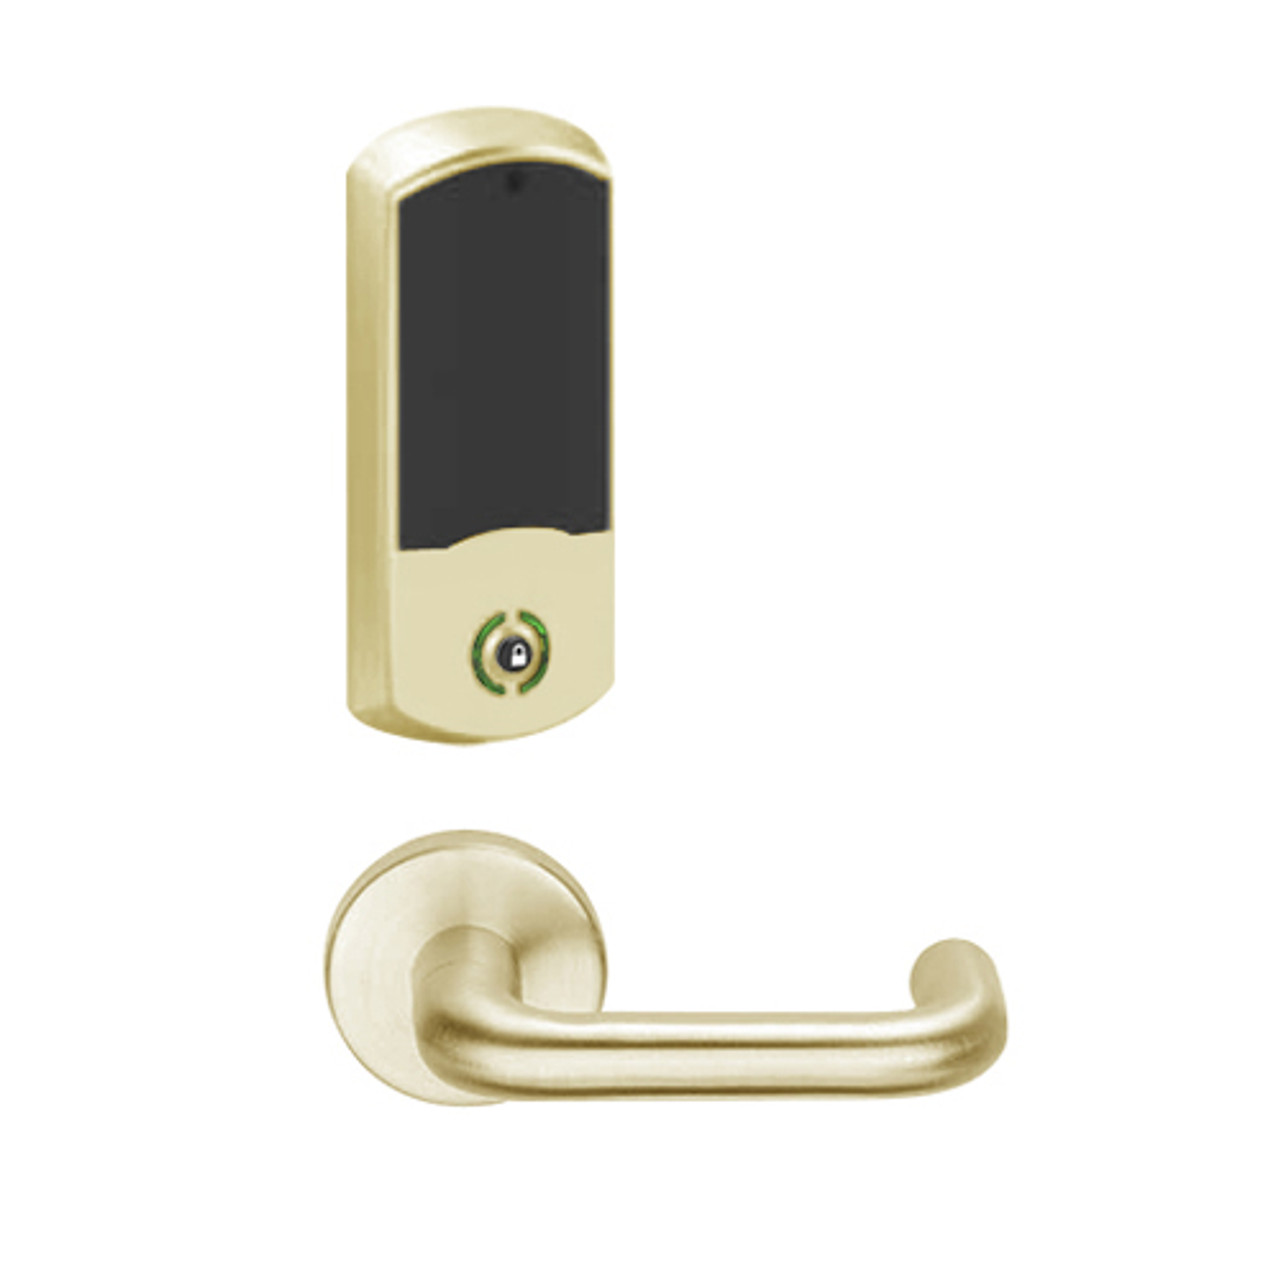 LEMB-GRW-L-03-606-00A Schlage Less Cylinder Privacy/Office Wireless Greenwich Mortise Lock with Push Button & LED Indicator and Tubular Lever in Satin Brass